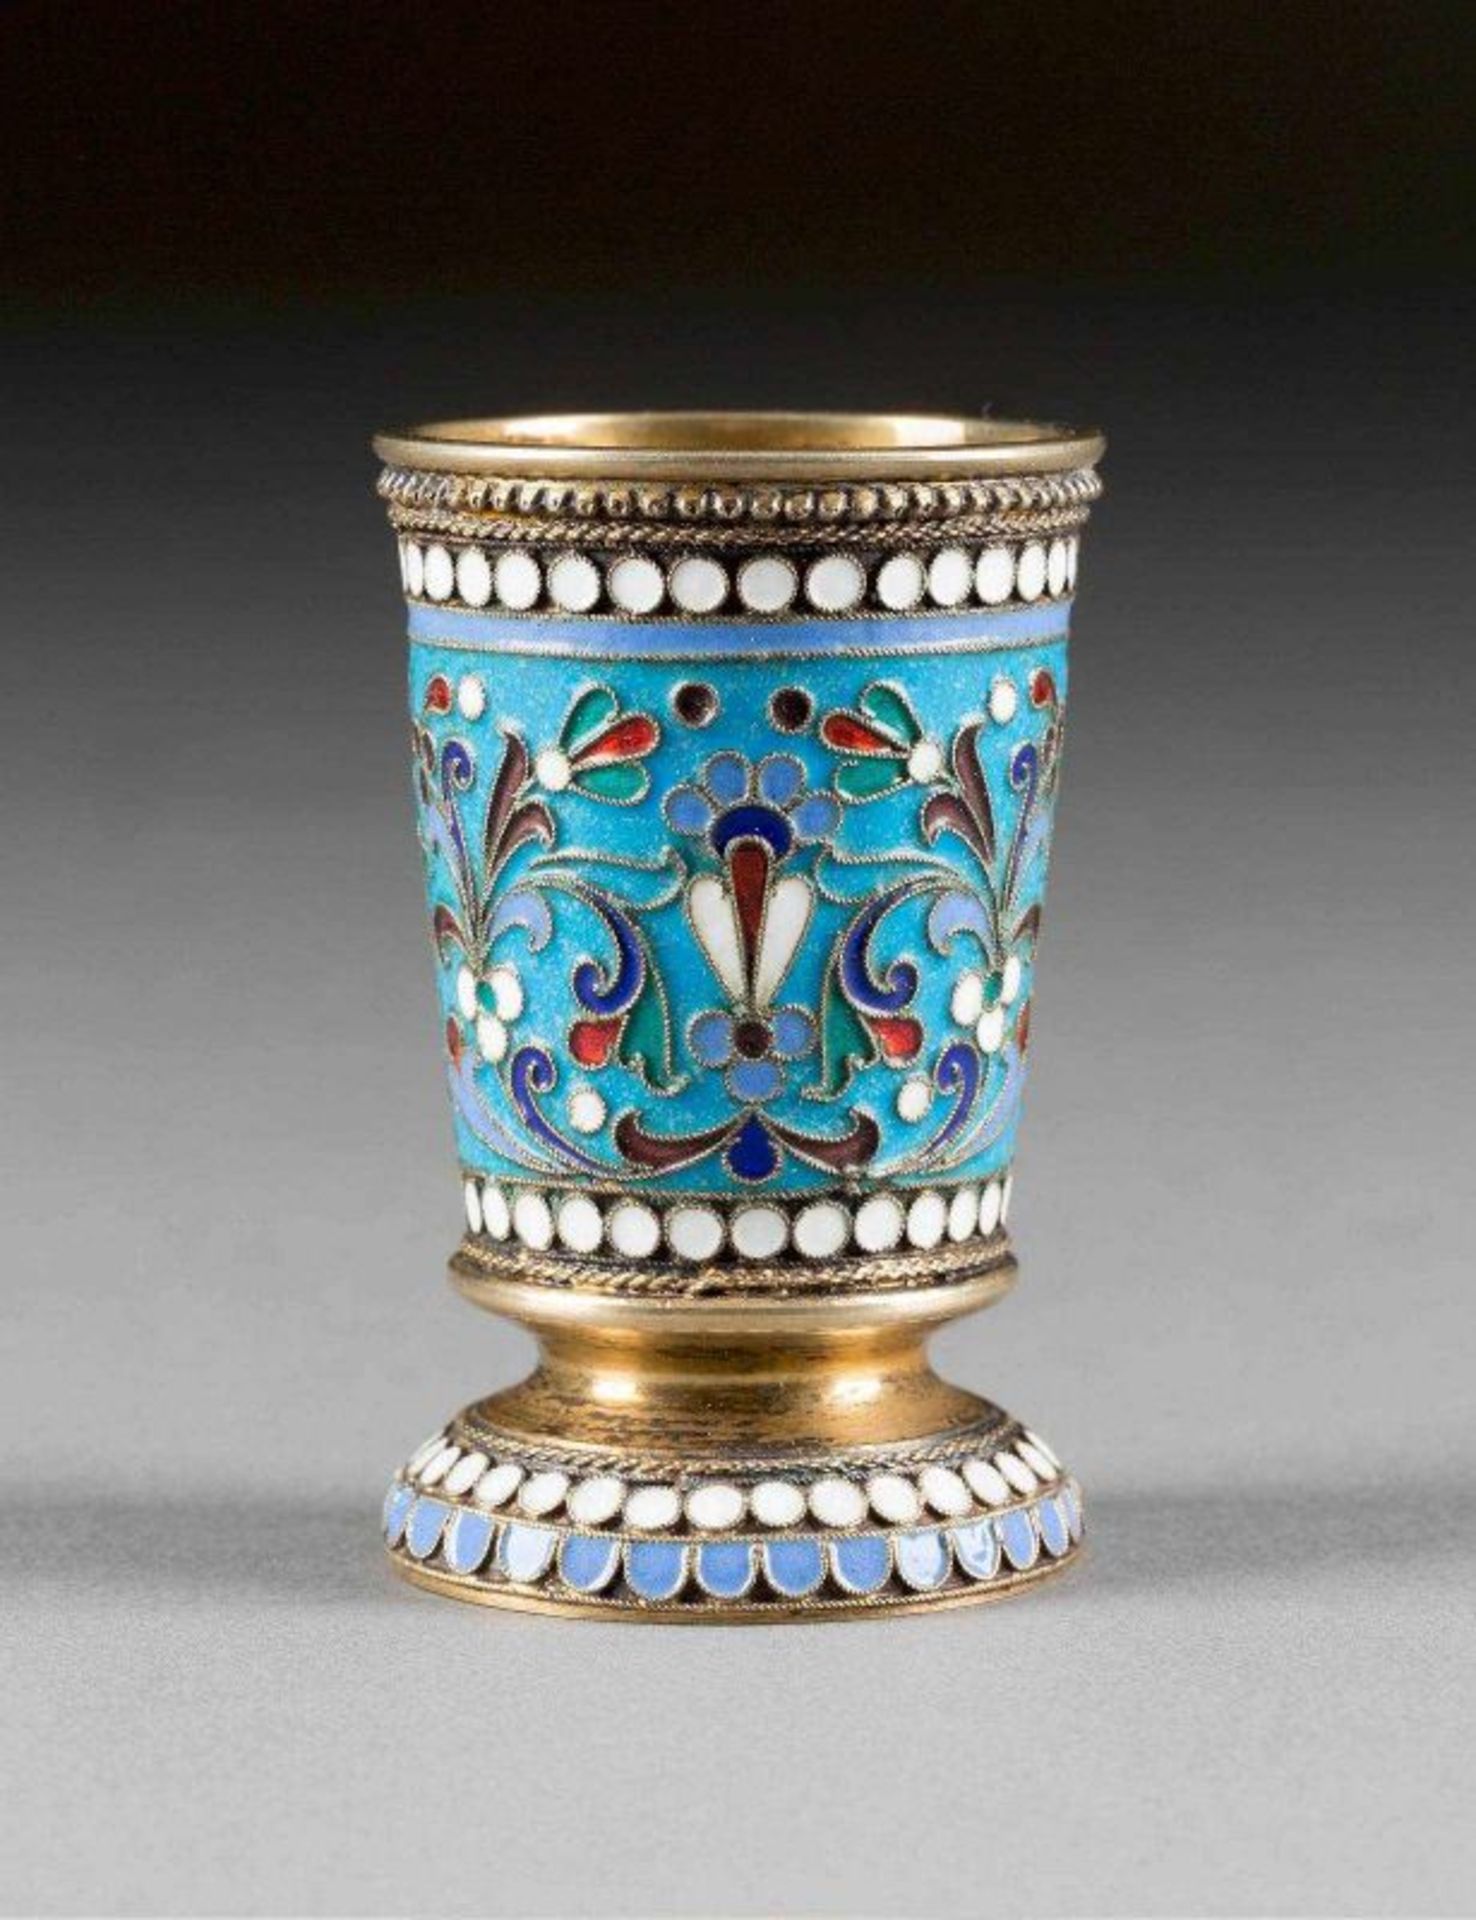 A SILVER-GILT AND CLOISONNÉ ENAMEL BEAKER Russian, Moscow, Ivan Saltykov, 1892 The body decorated